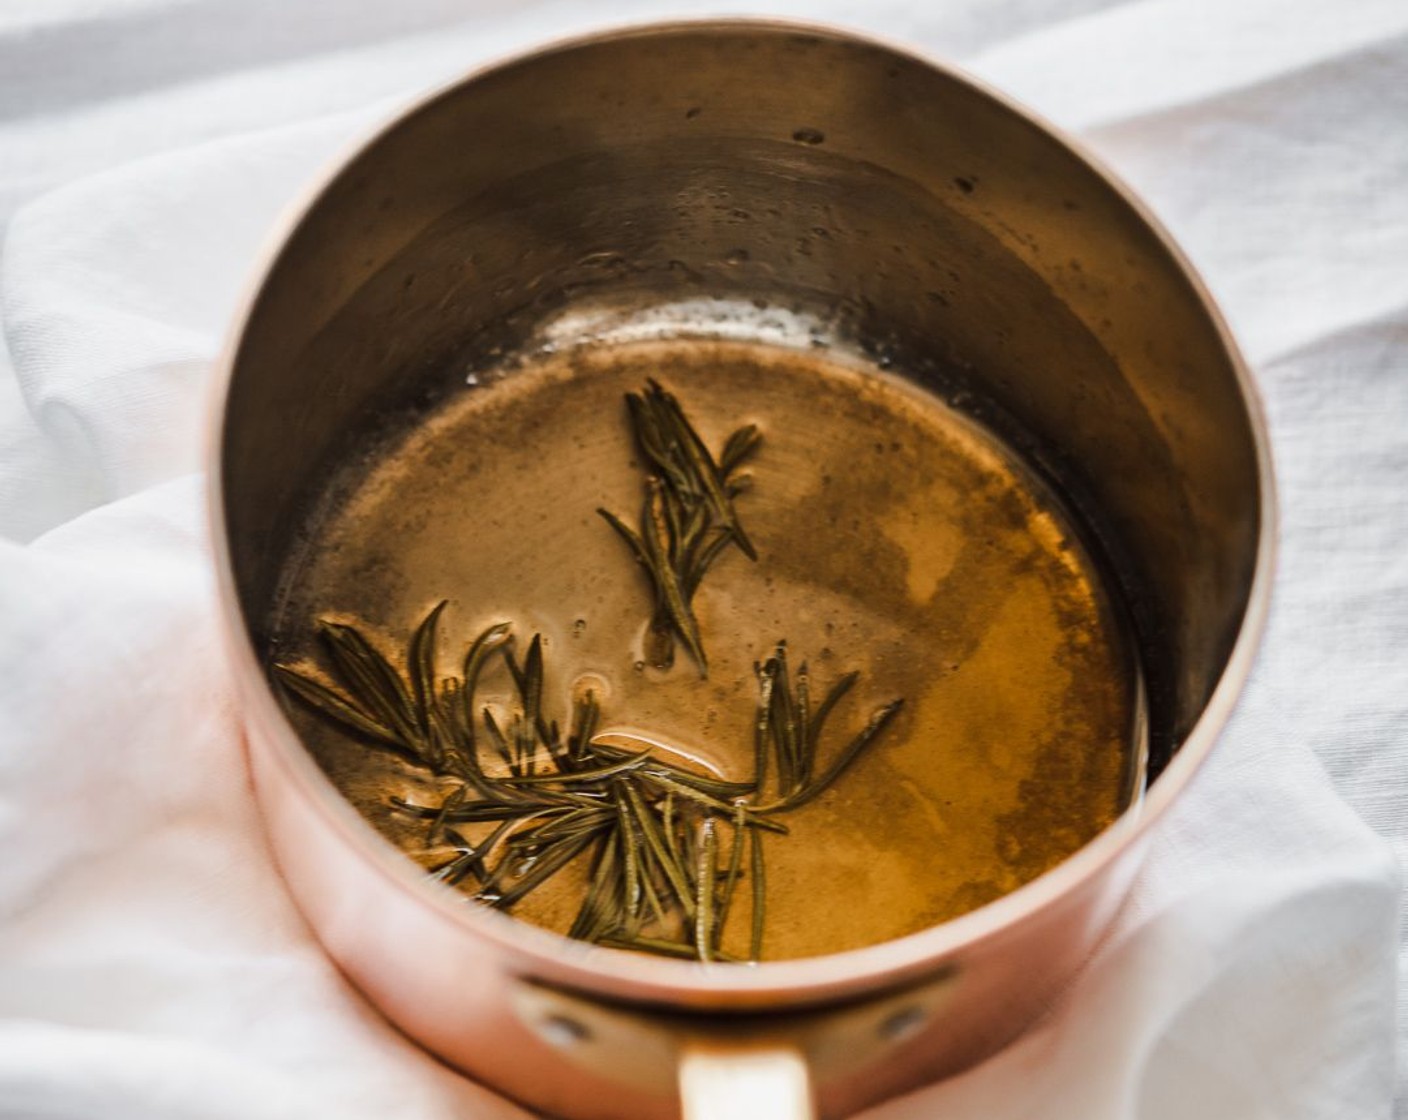 step 1 Add White Wine Vinegar (1/2 cup), Honey (1/4 cup), and Fresh Rosemary (1 sprig) to a small saucepan and whisk to combine